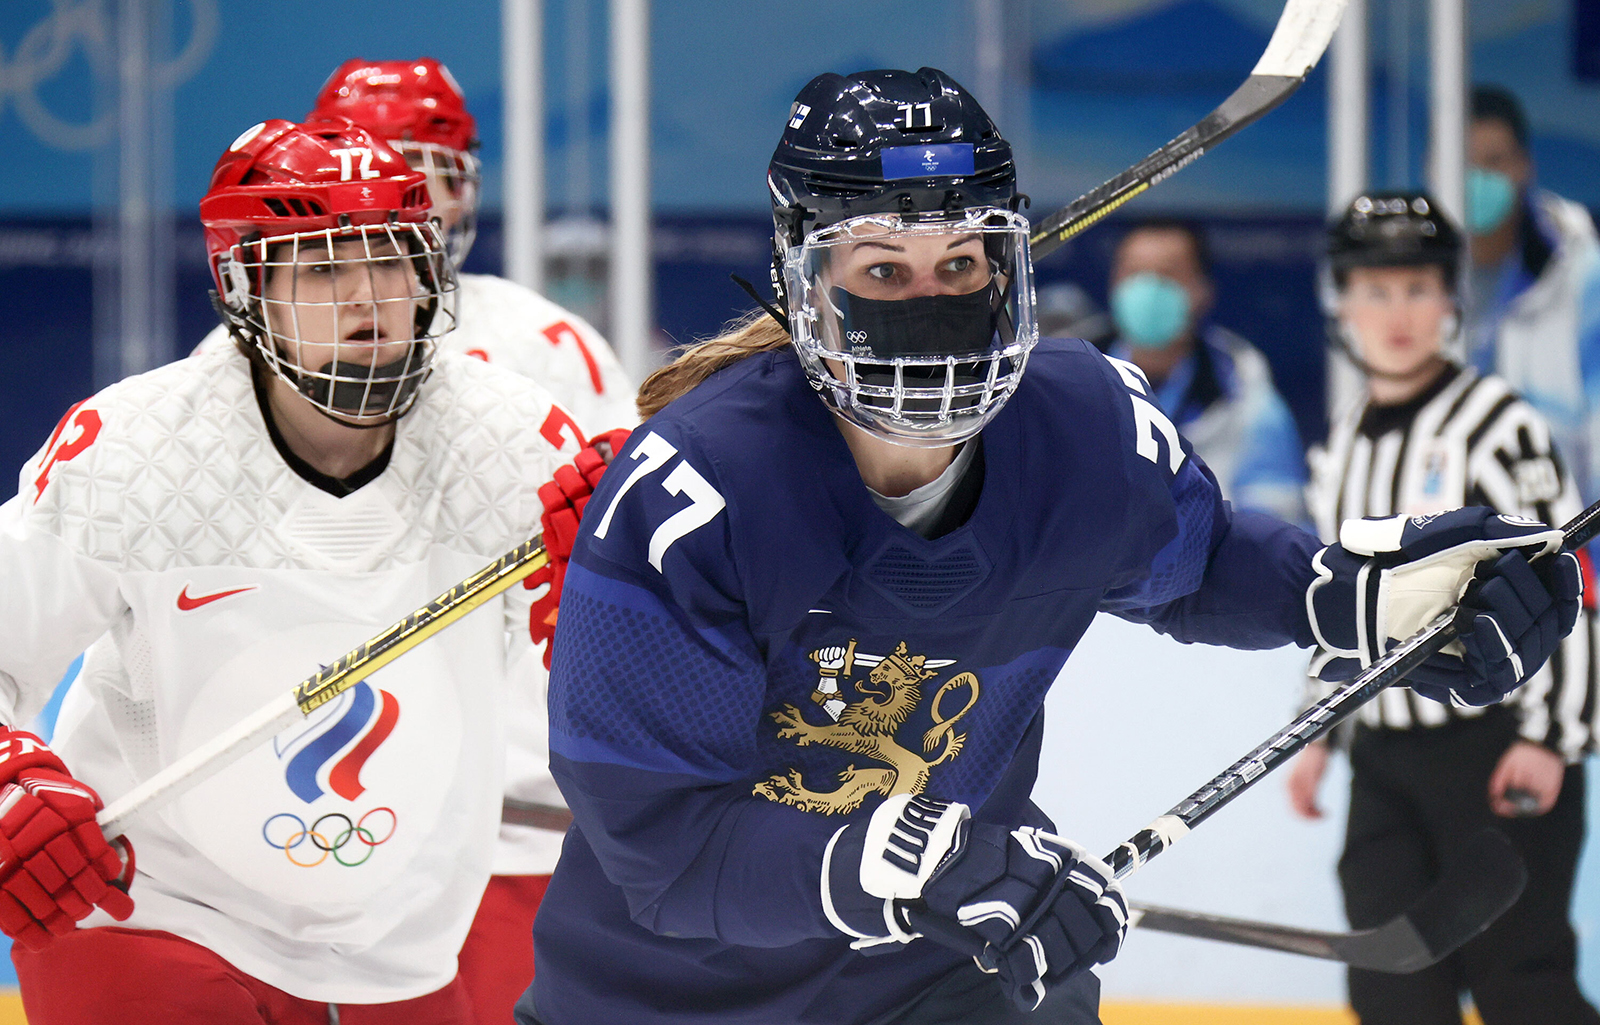 Anna Savonina (L) of the ROC Team and Susanna Tapani of Finland fight for the puck in their women's Group A ice hockey match on February 8.